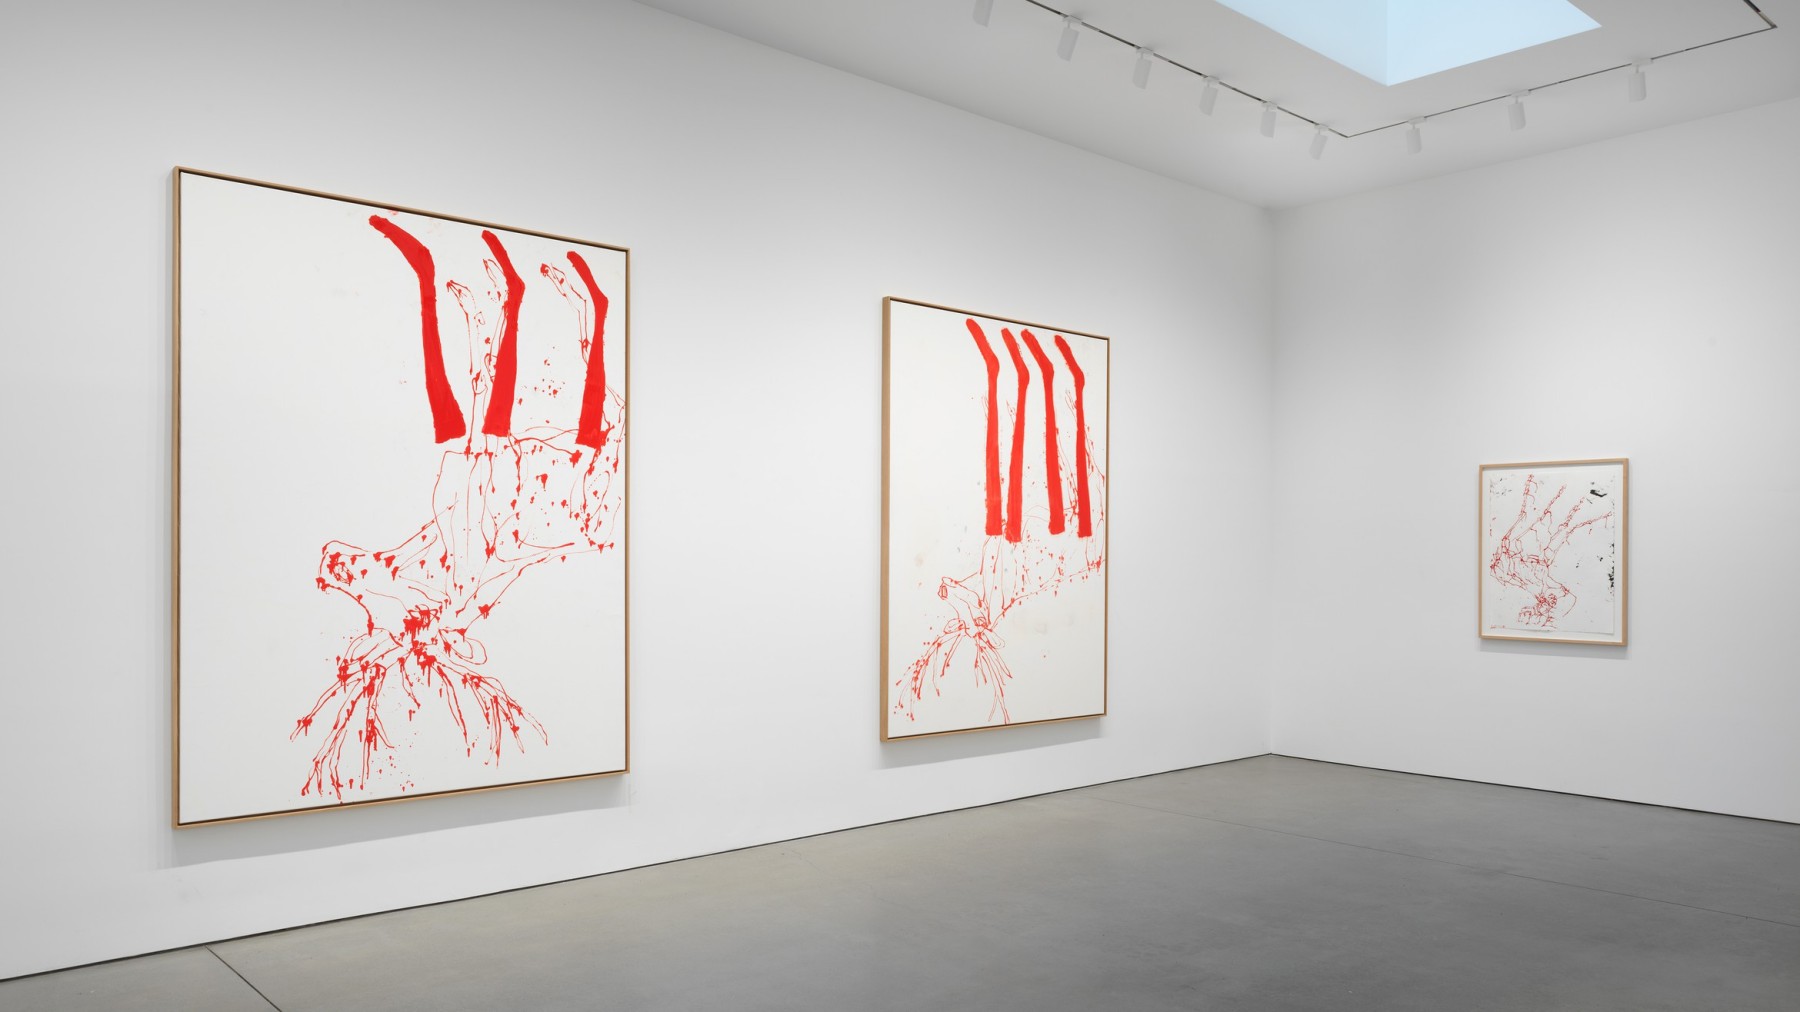 Installation image for Georg Baselitz: The Painter in His Bed, at Gagosian